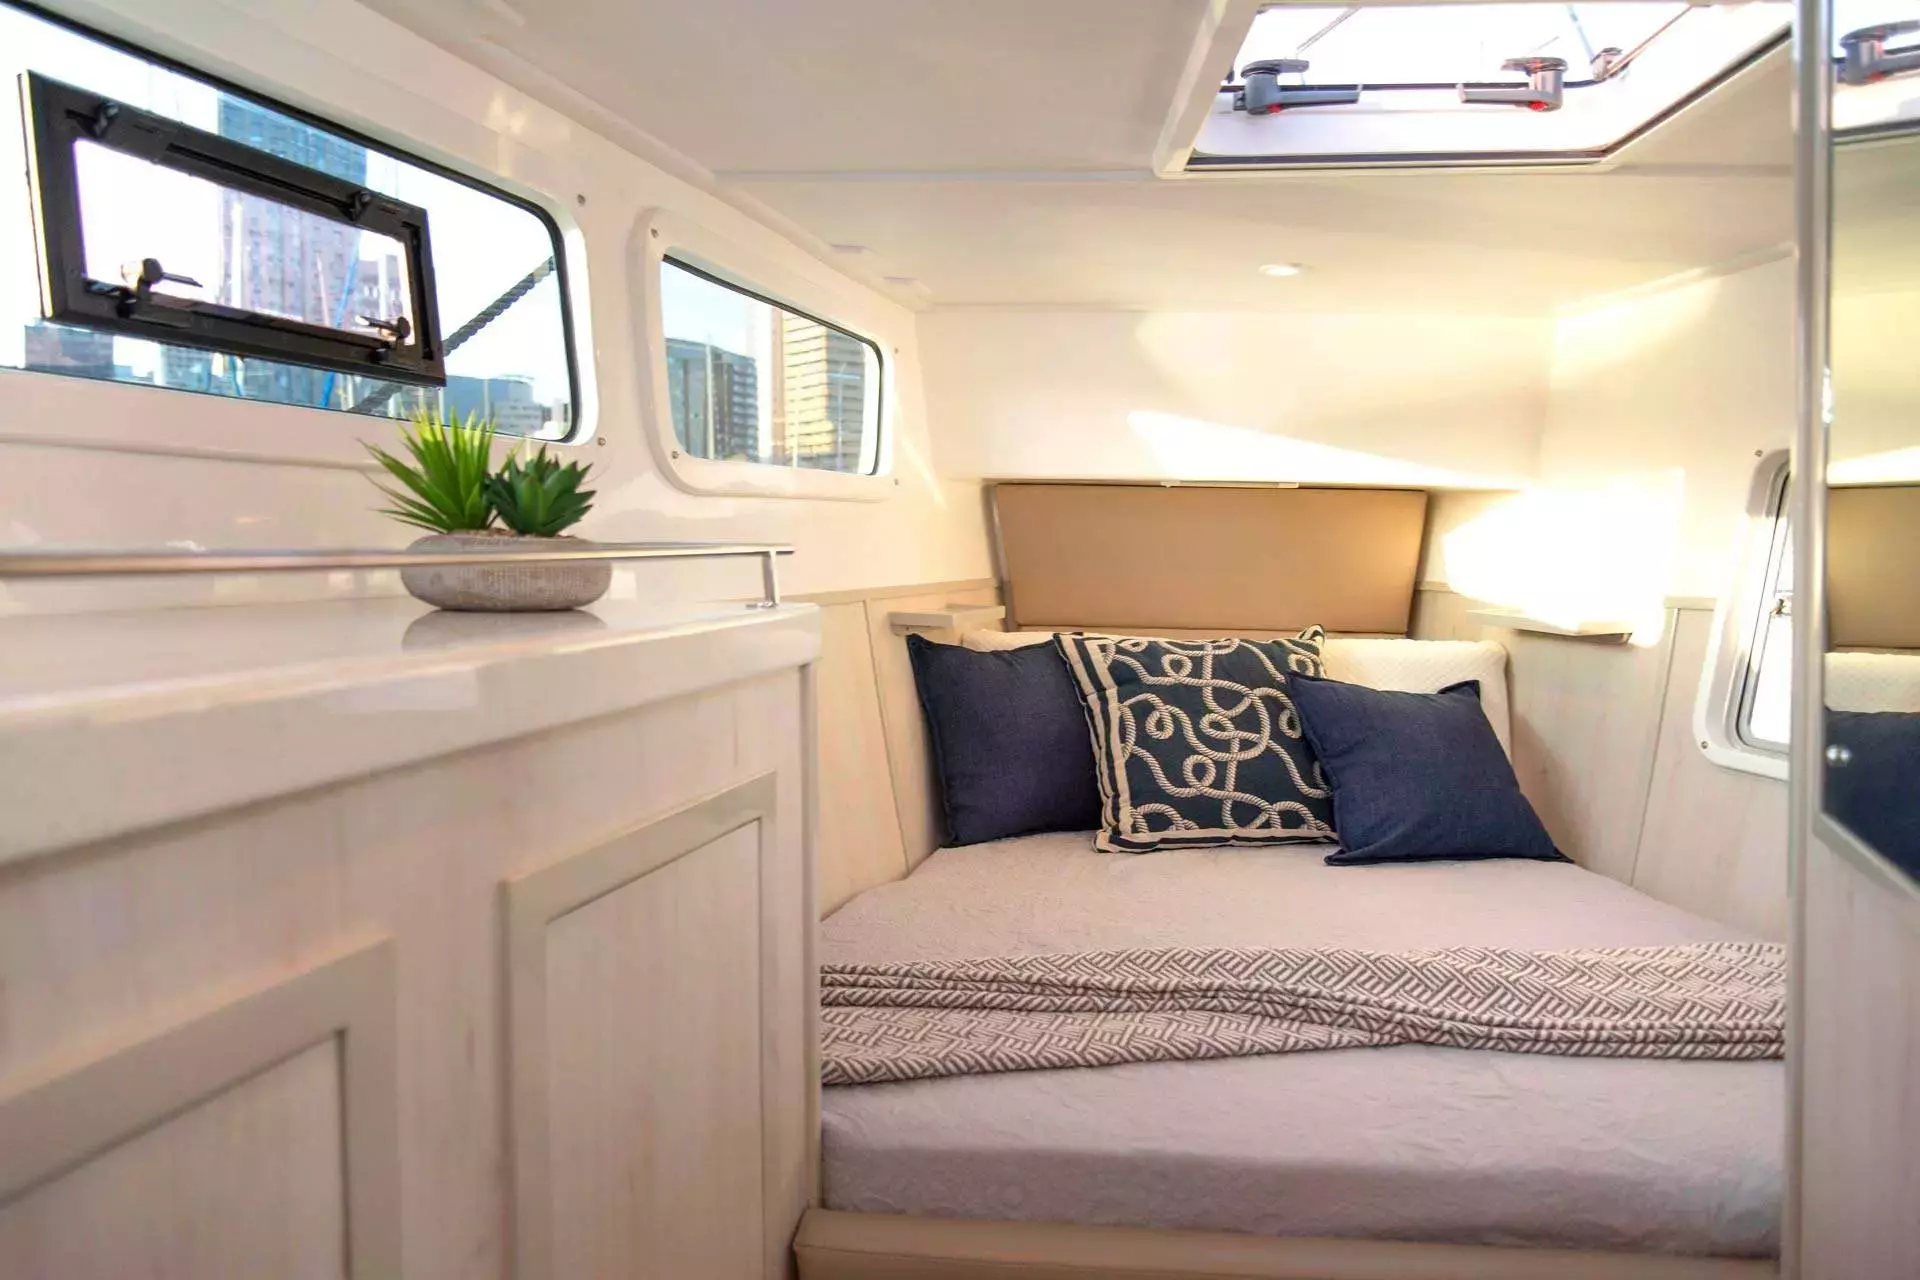 Barefeet Retreat by Royal Cape - Special Offer for a private Sailing Catamaran Rental in St Thomas with a crew